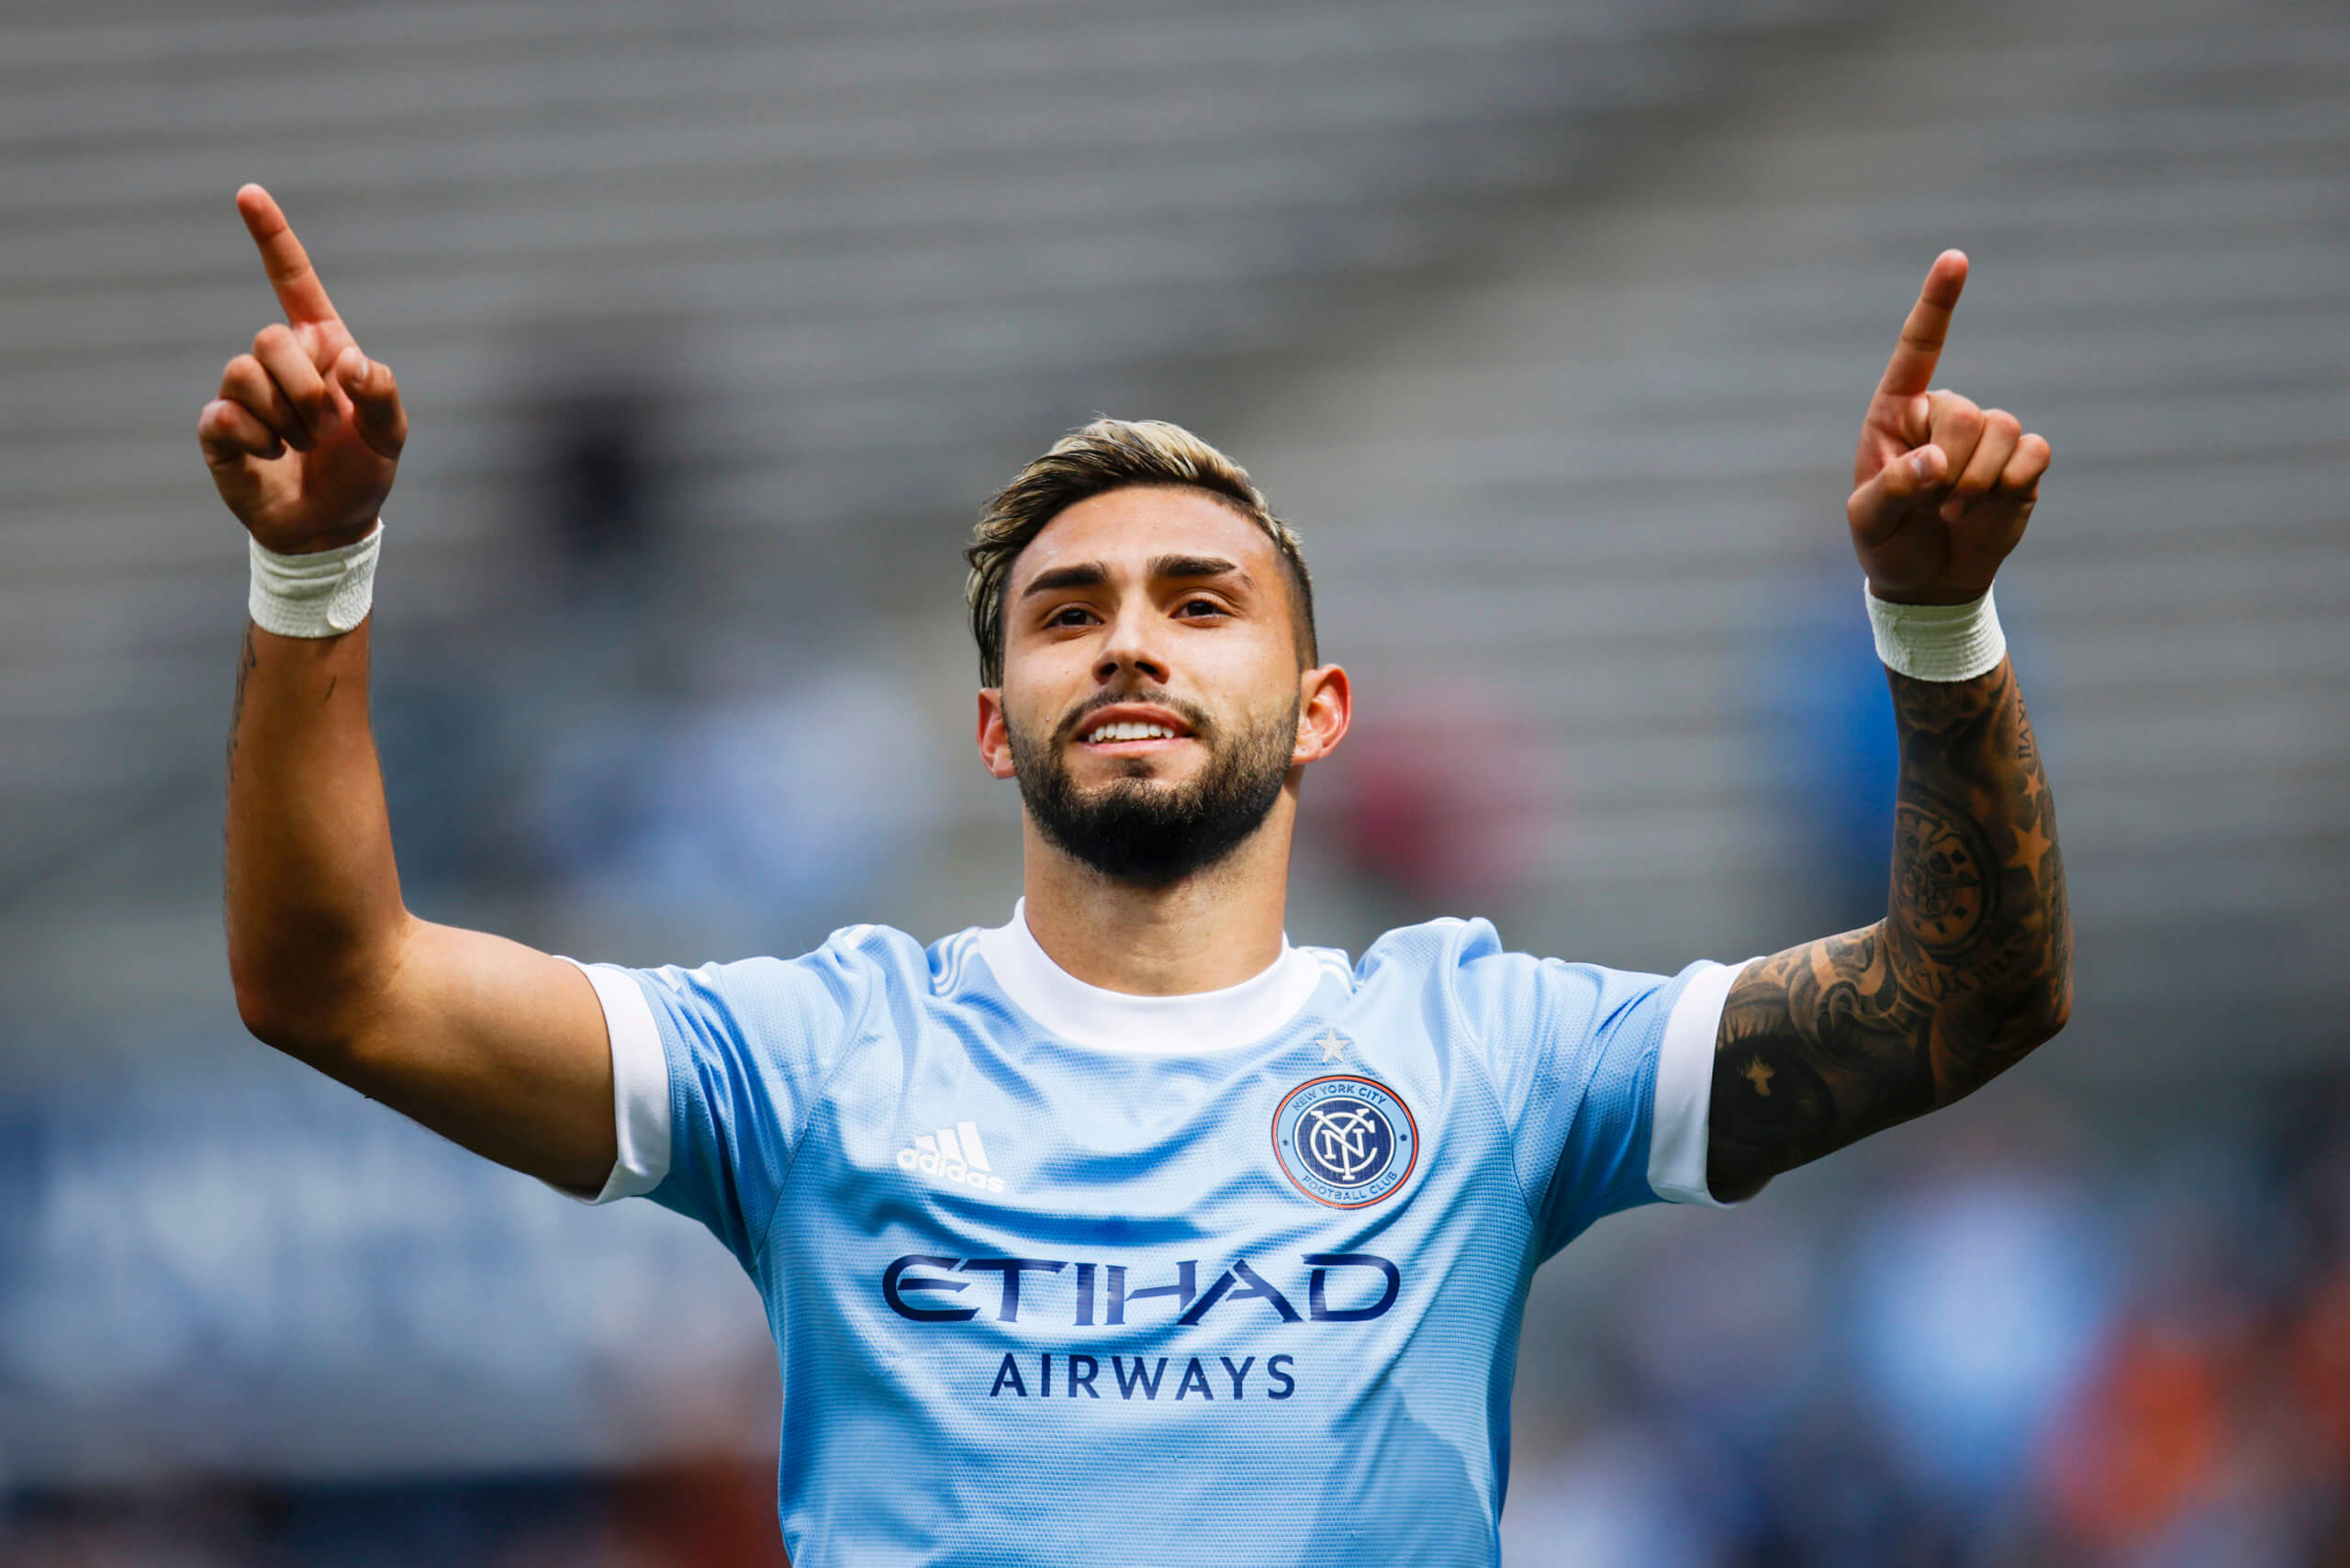 NYCFC best scorer Valentin Castellanos becoming a member of Los angeles Liga’s Girona FC on mortgage